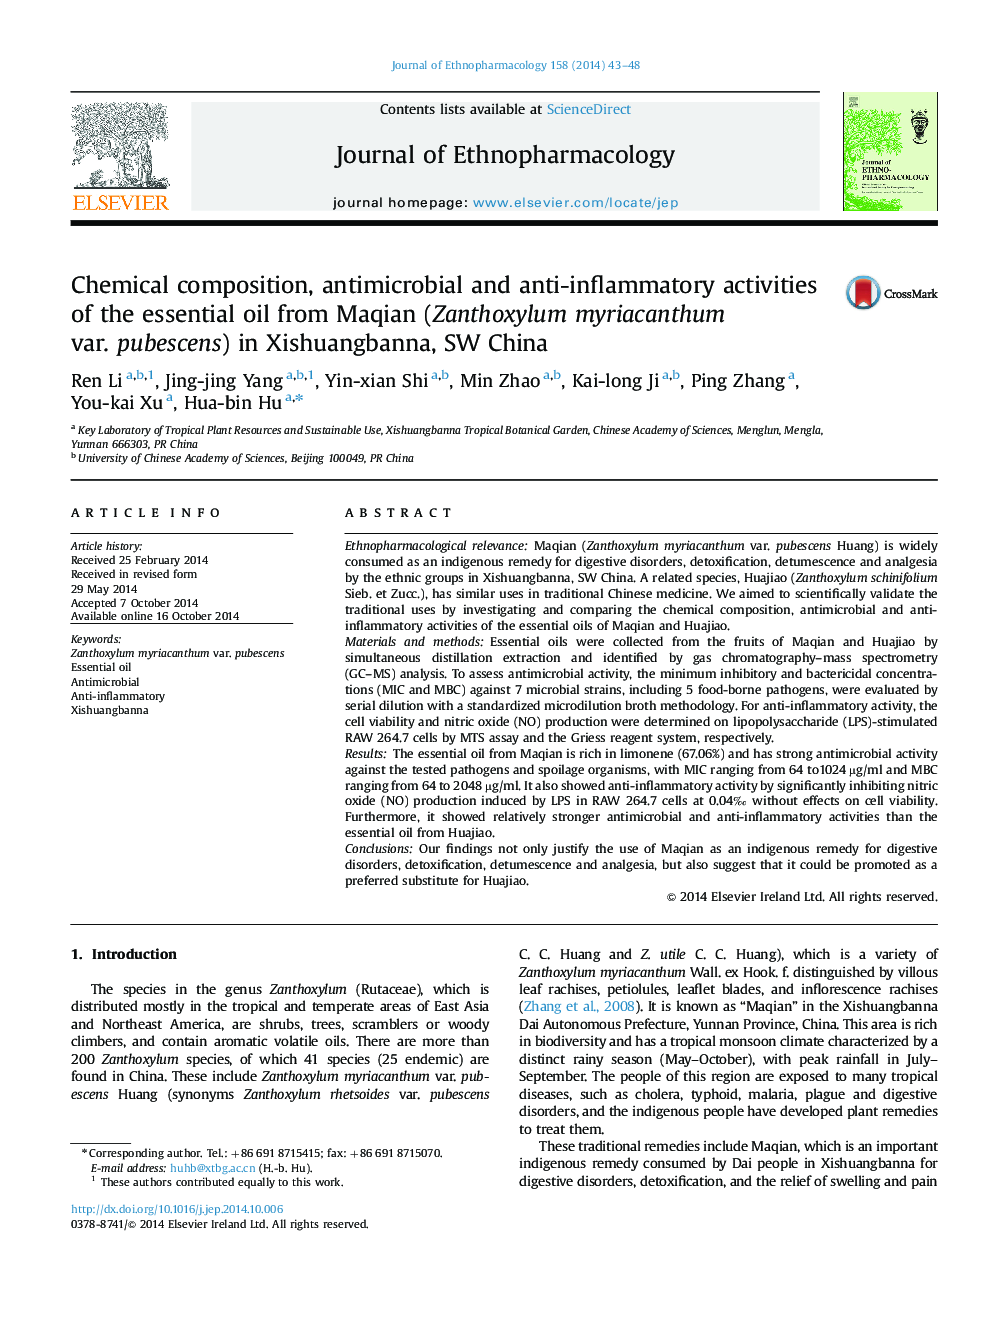 Chemical composition, antimicrobial and anti-inflammatory activities of the essential oil from Maqian (Zanthoxylum myriacanthum var. pubescens) in Xishuangbanna, SW China